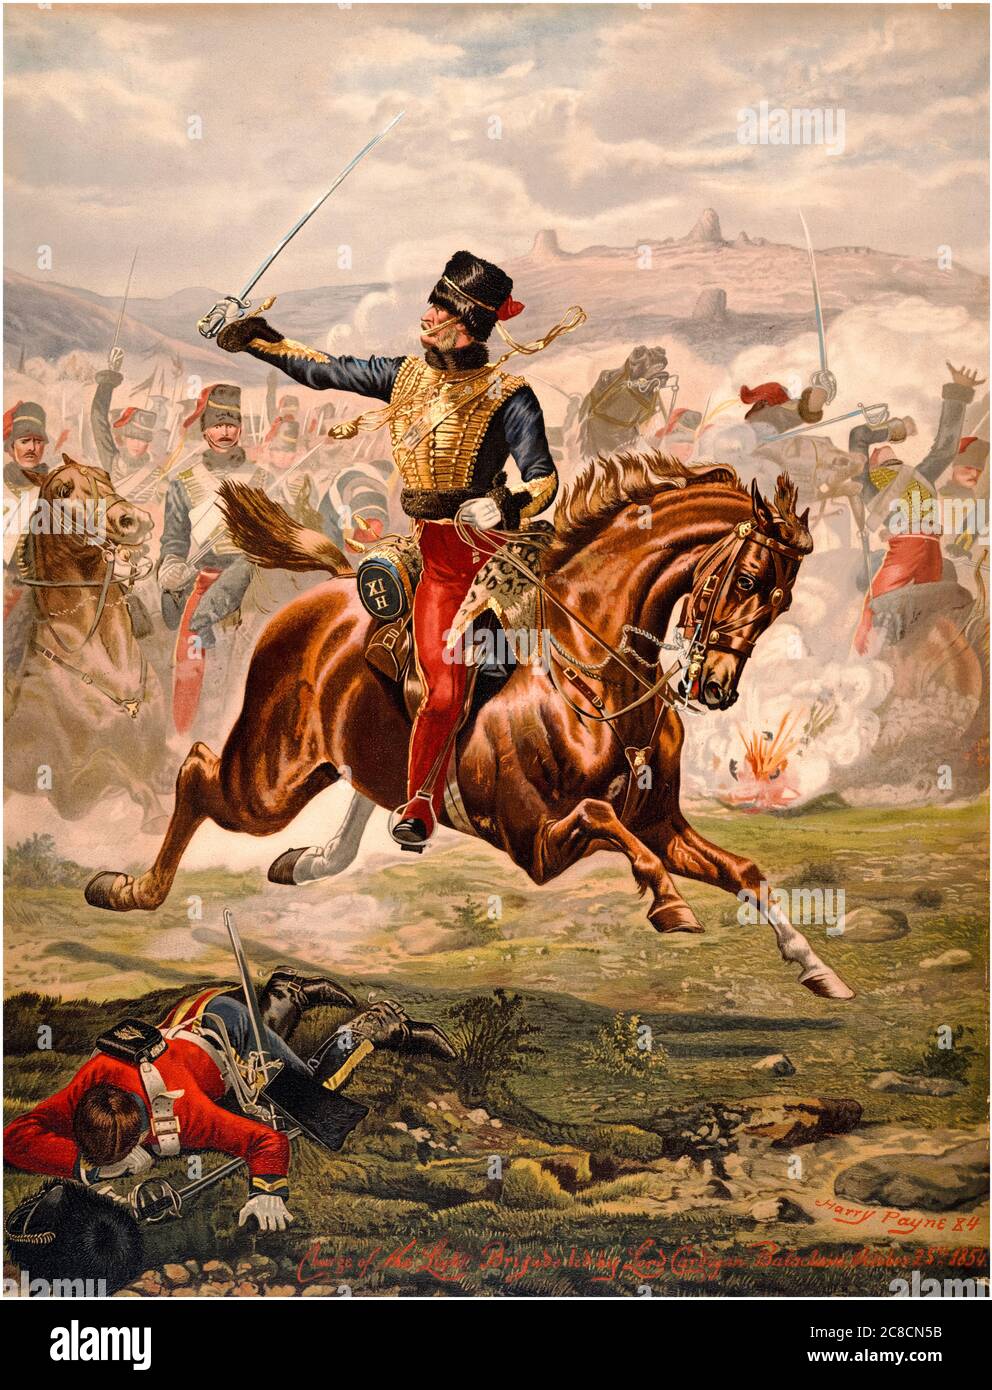 The Charge of the Light Brigade led by Lord Cardigan at the Battle of Balaclava, 25th October 1854, lithograph by Harry Payne, 1884 Stock Photo